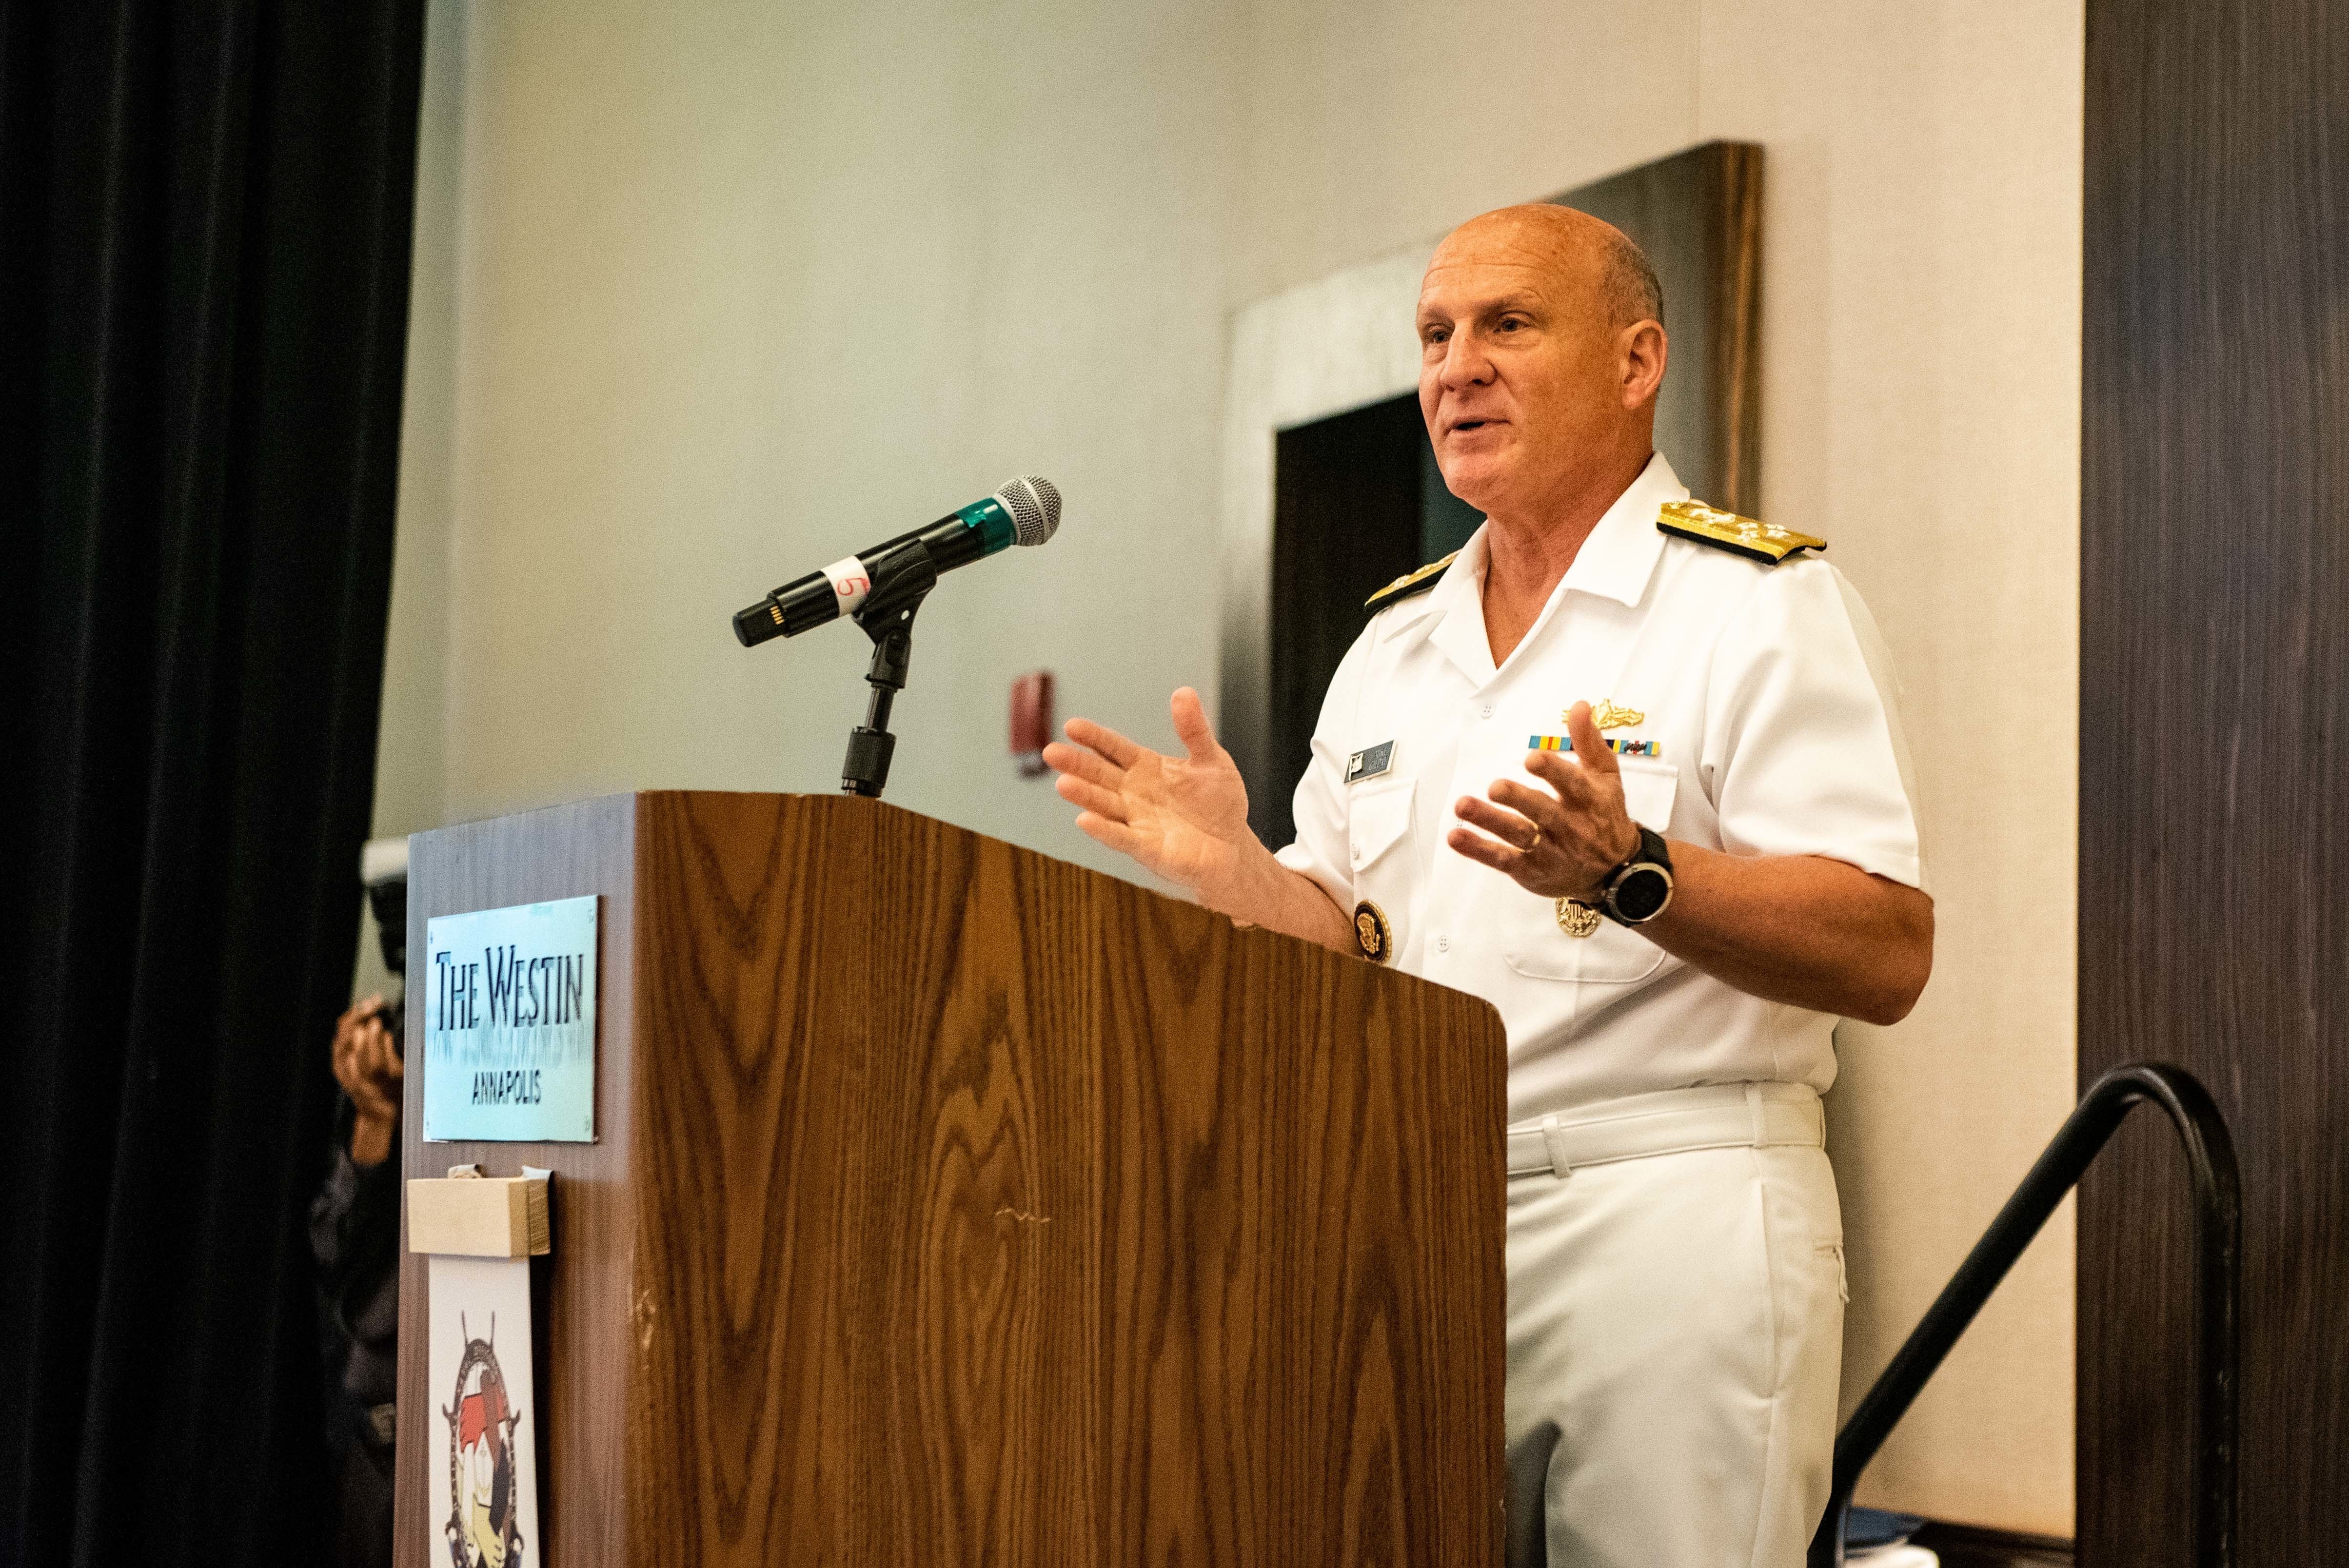 Chief of Naval Operations Adm. Mike Gilday speaks to the National Naval Officers Association (NNOA) during their 50th Anniversary Symposium Awards Luncheon held at the Westin Hotel in Annapolis, Md., July 27.